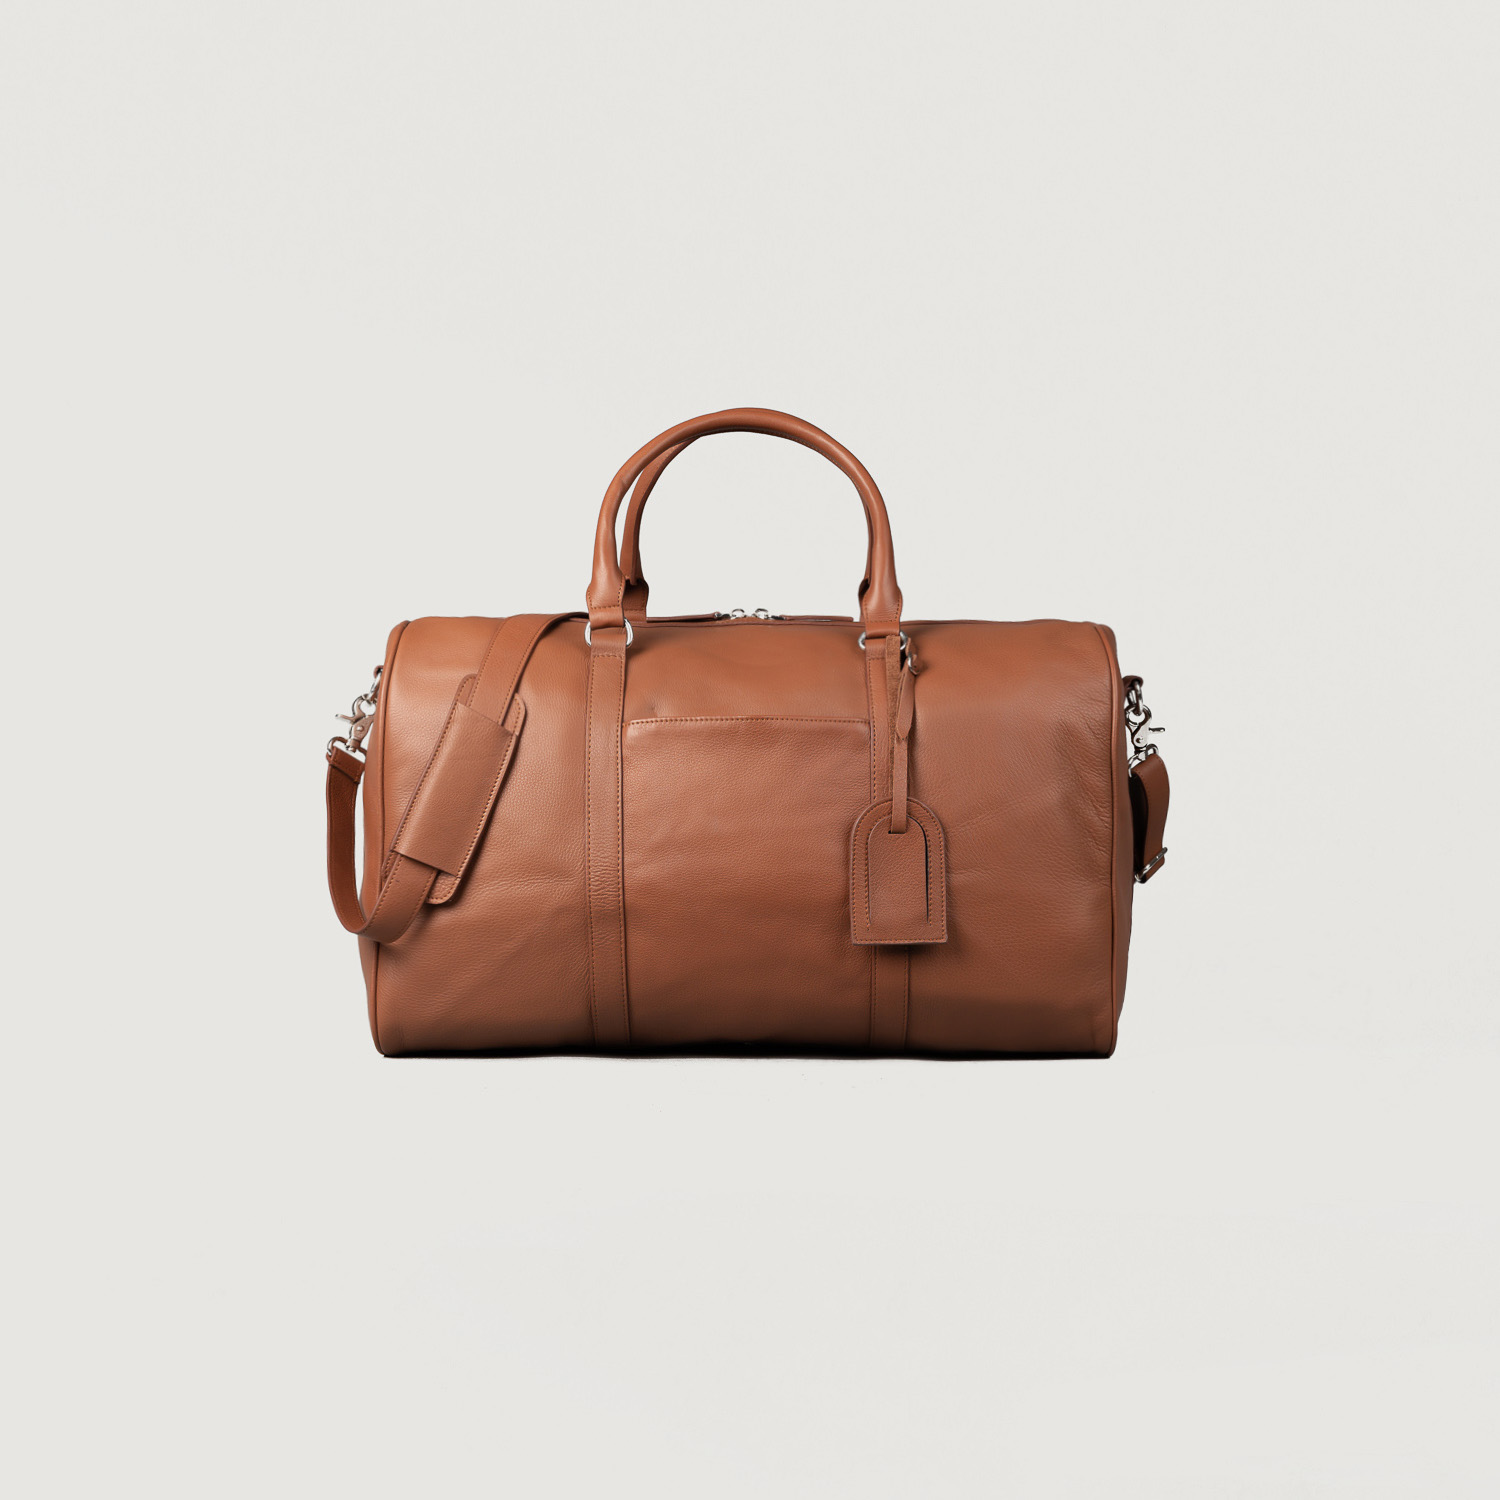 The Darrio Brown Leather Duffle Bag
